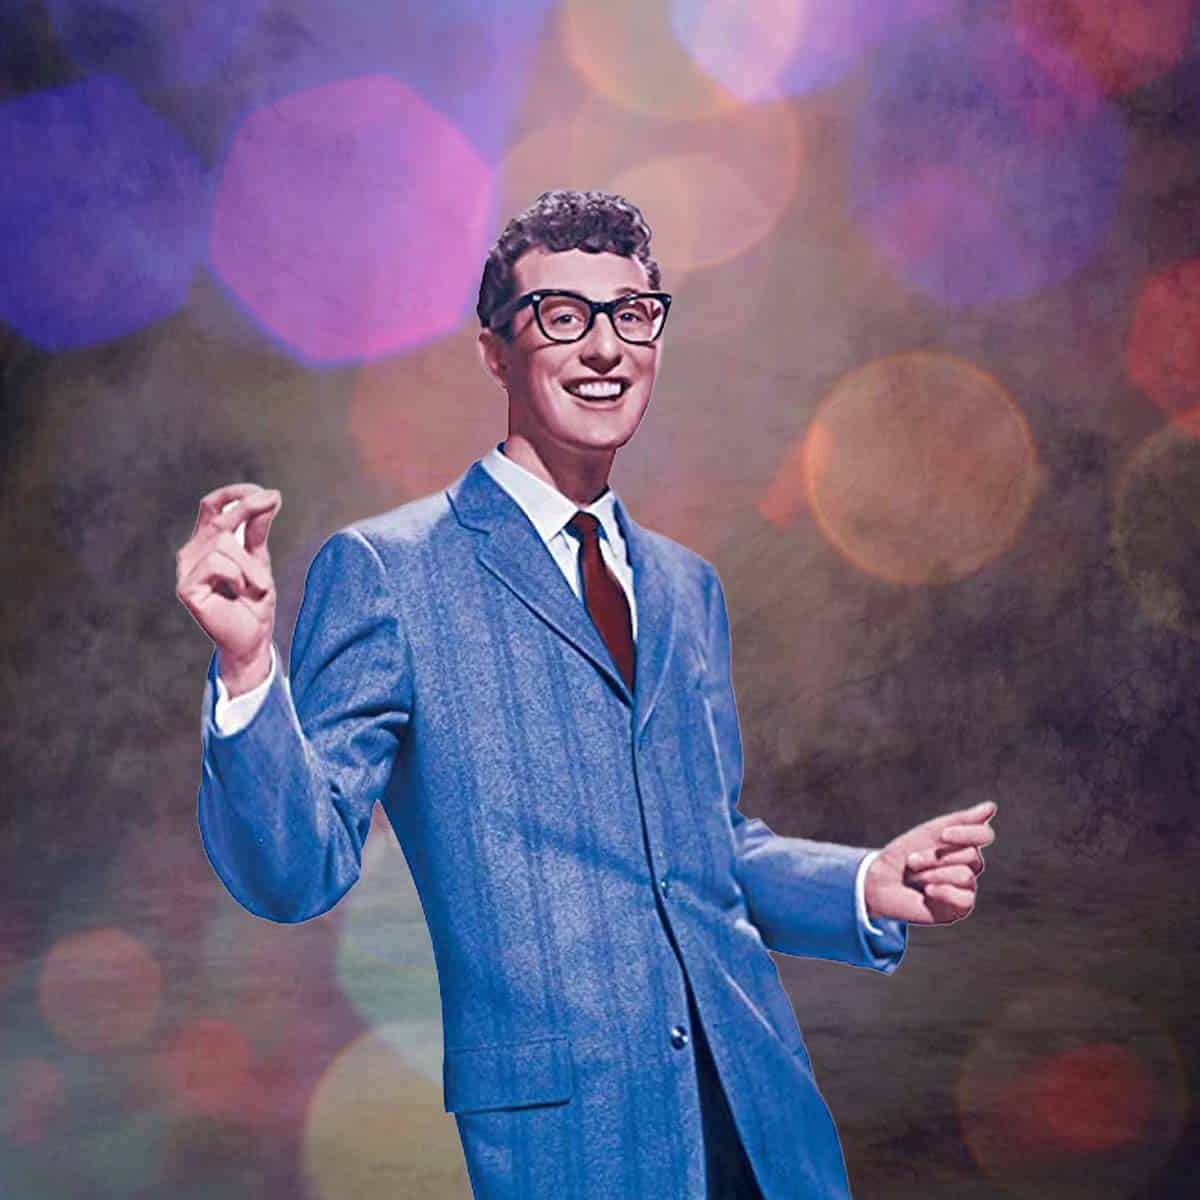 Painted Portrait Of Buddy Holly And The Crickets Wallpaper